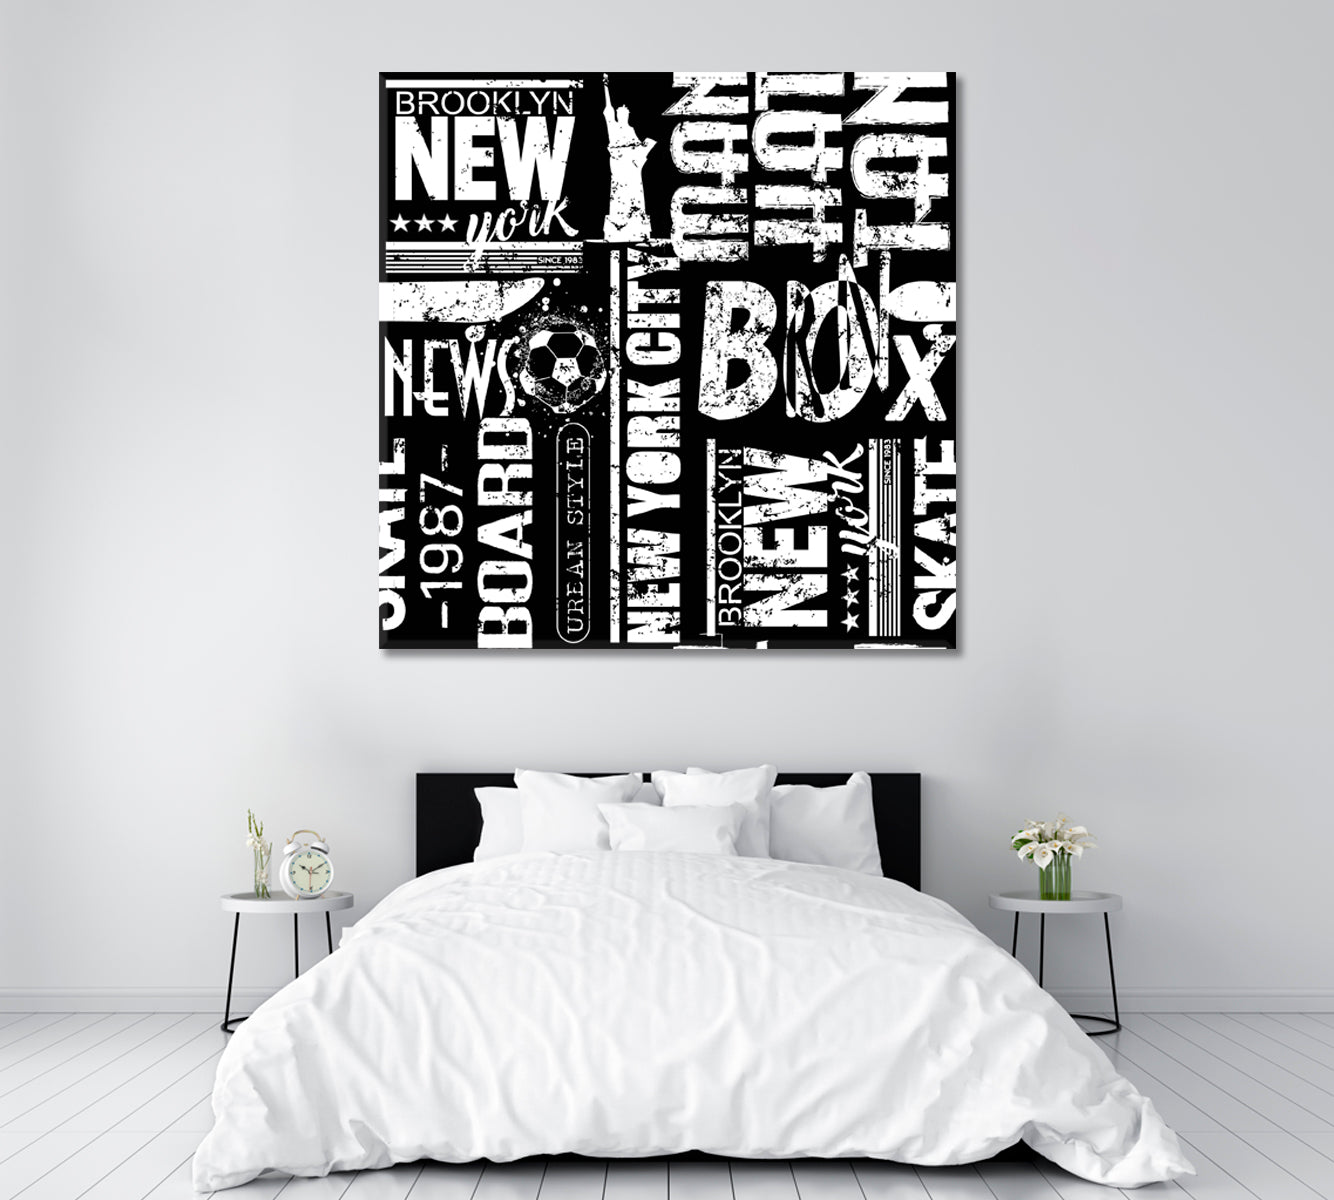 Abstract Pattern with Boroughs of New York. Manhattan, Brooklyn, The Bronx. Canvas Print ArtLexy 1 Panel 12"x12" inches 